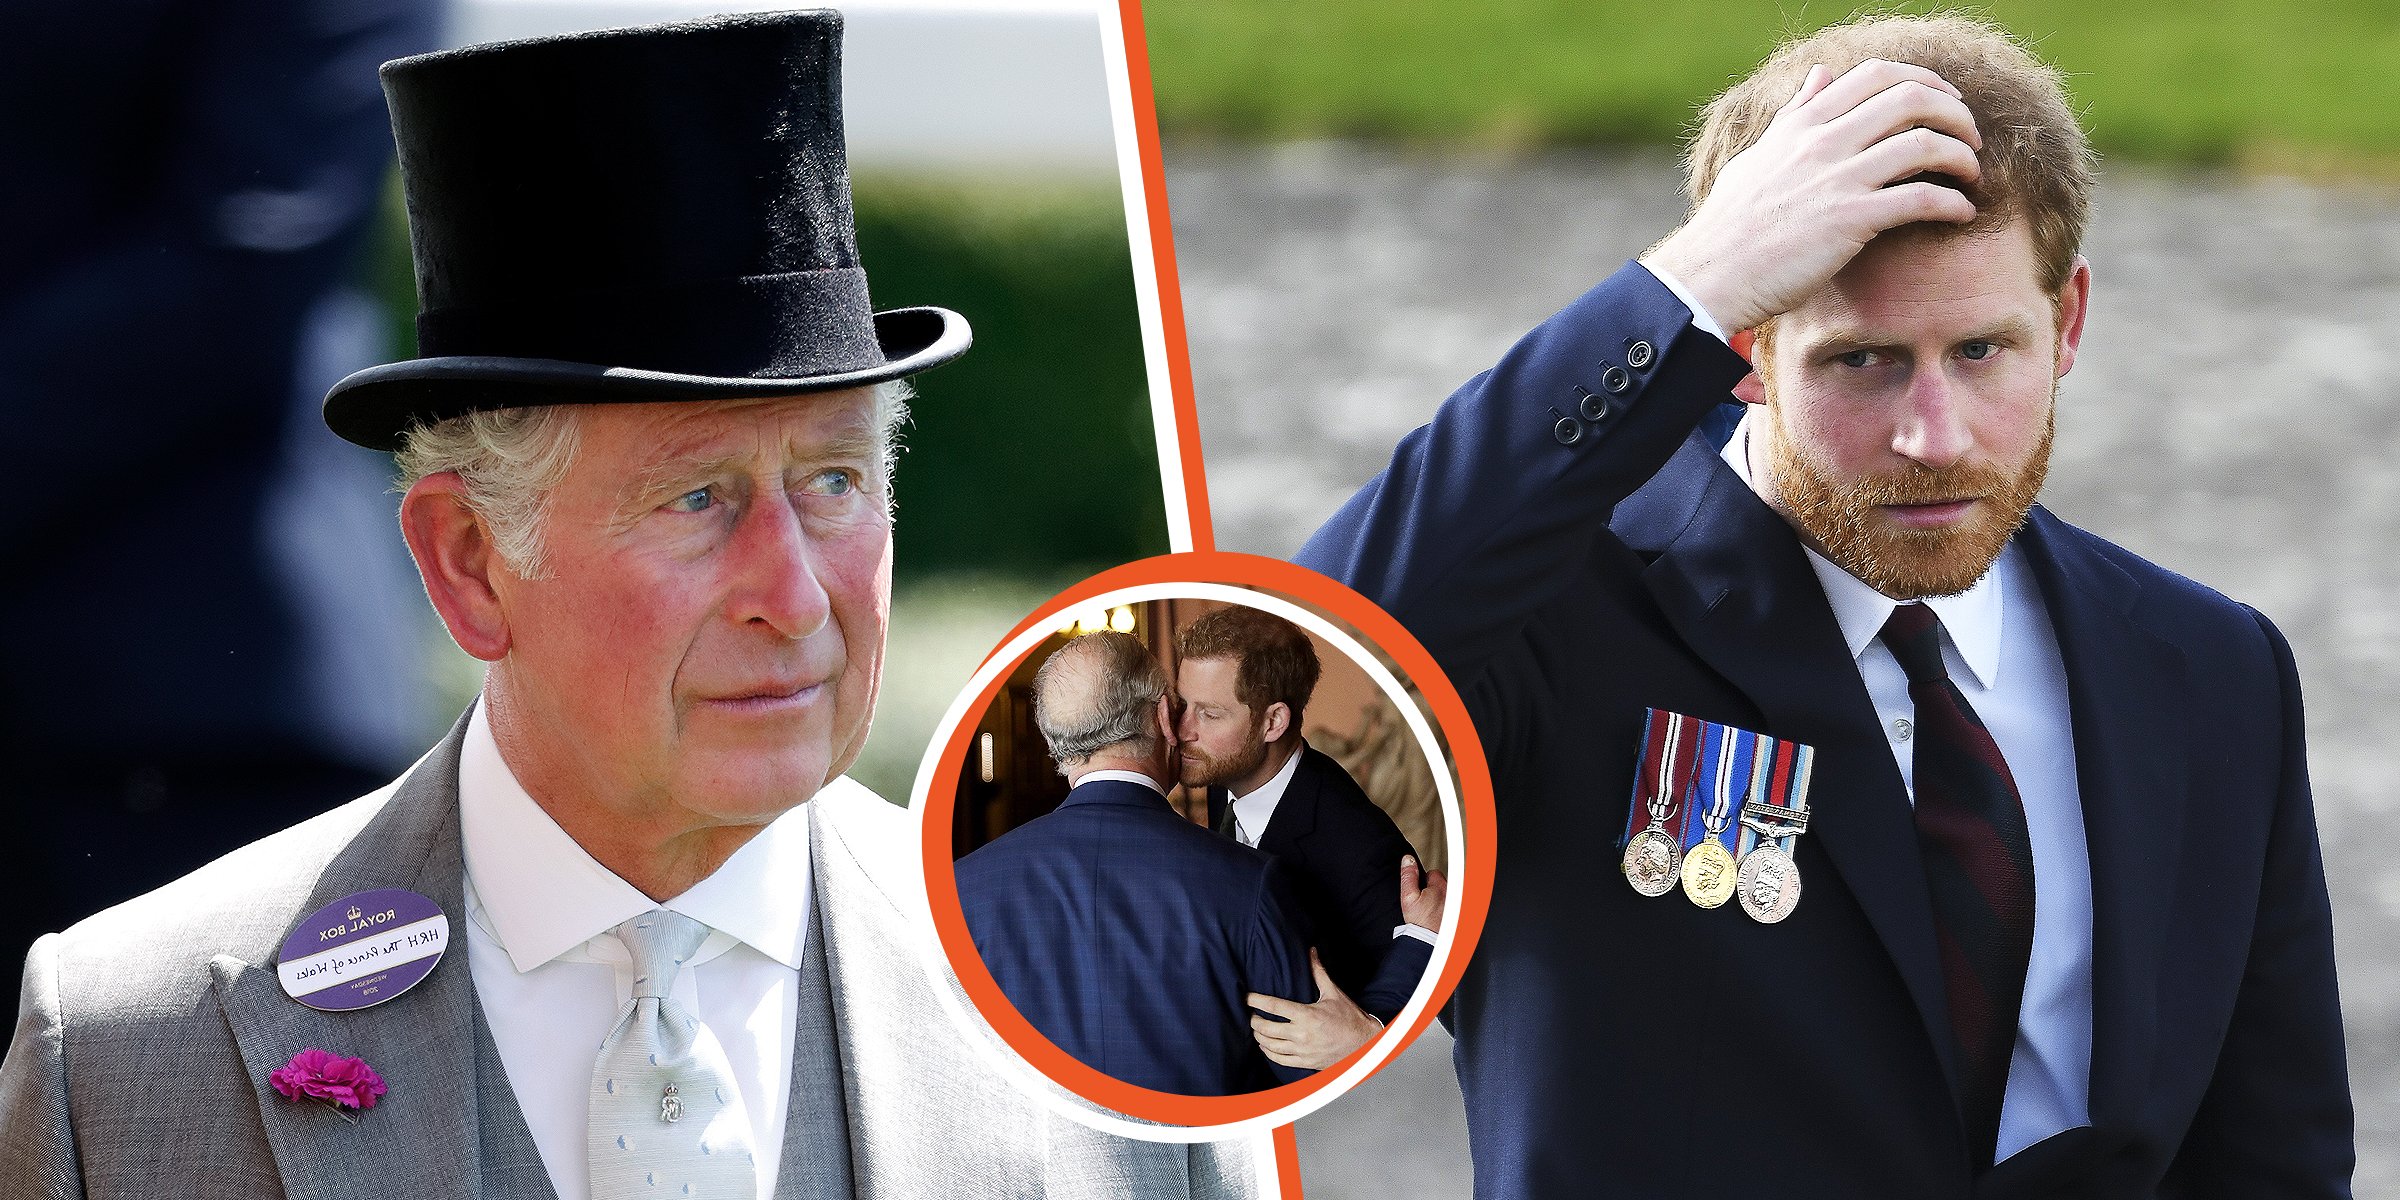 Prince Harry and King Charles III. | Source: Getty Images 